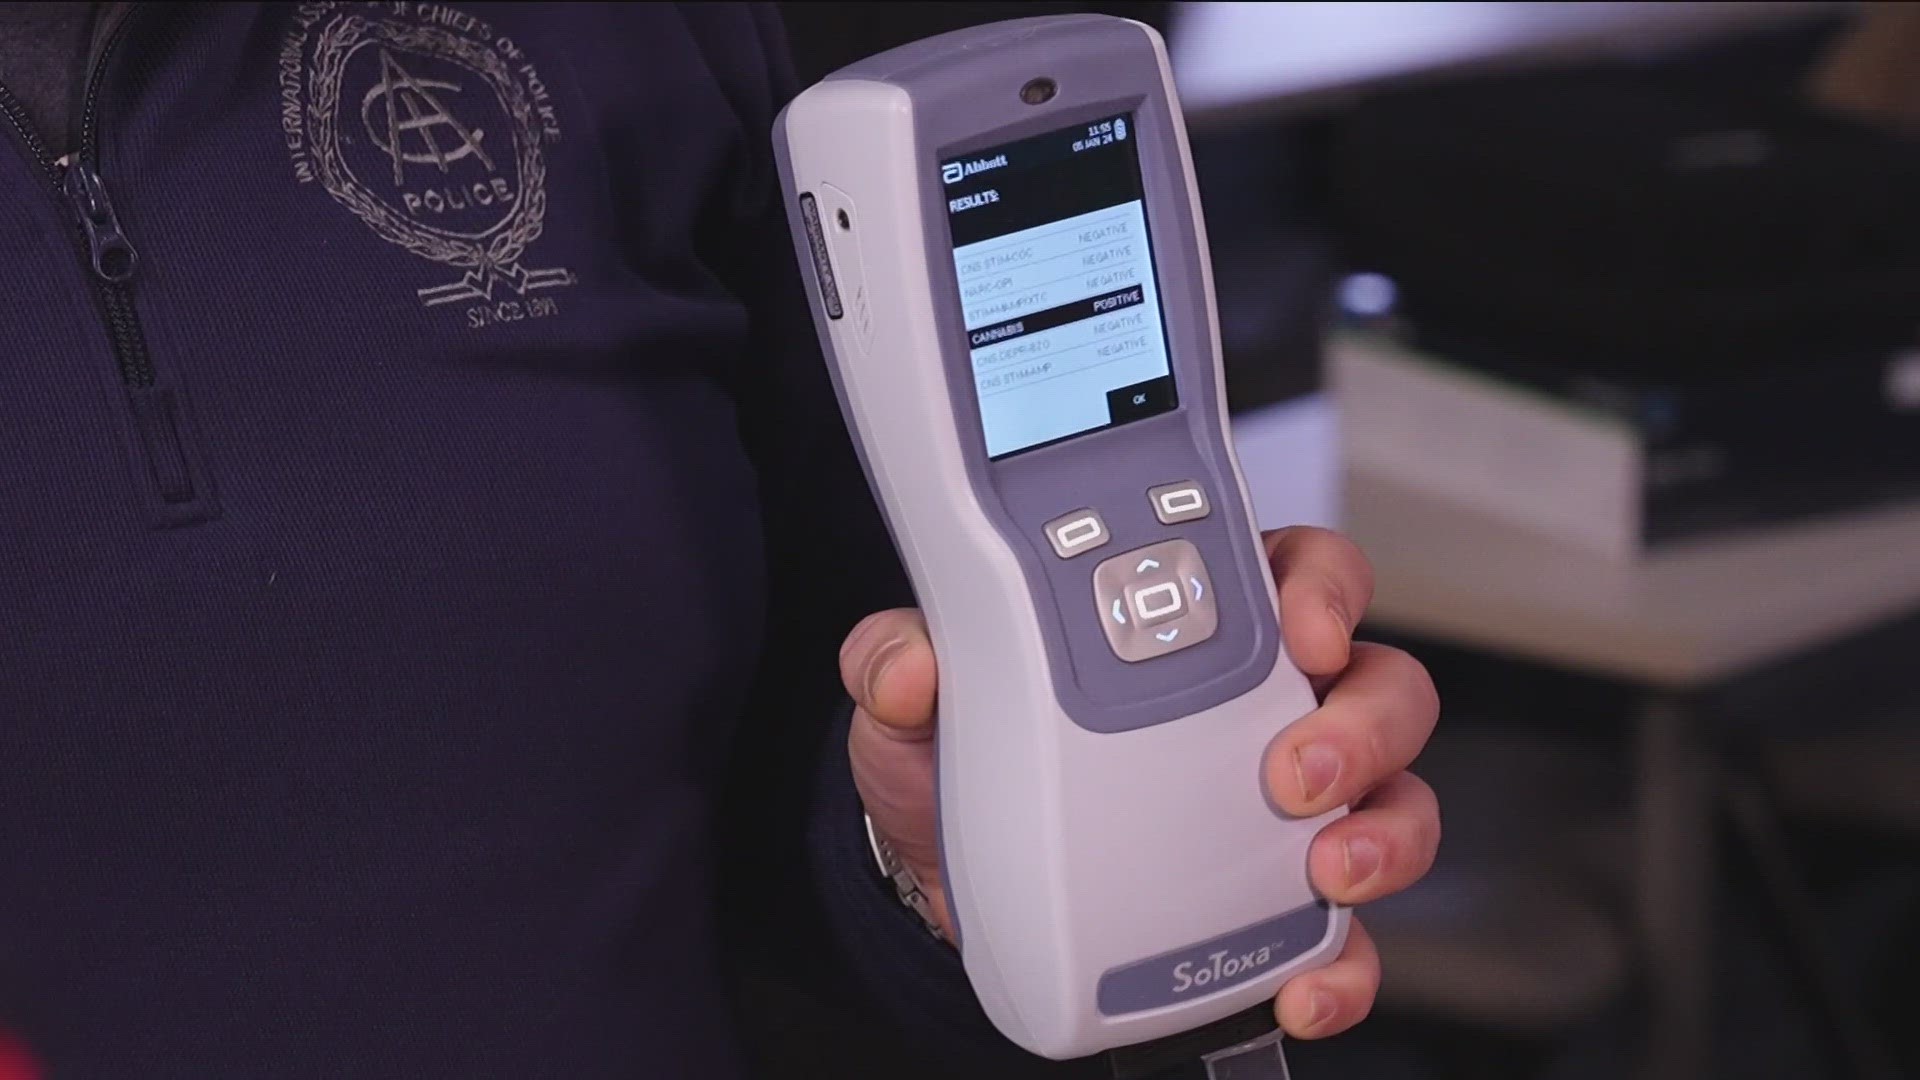 Officers now have access to an oral swab testing device called SoToxa, which they say can detect drugs like cannabis.